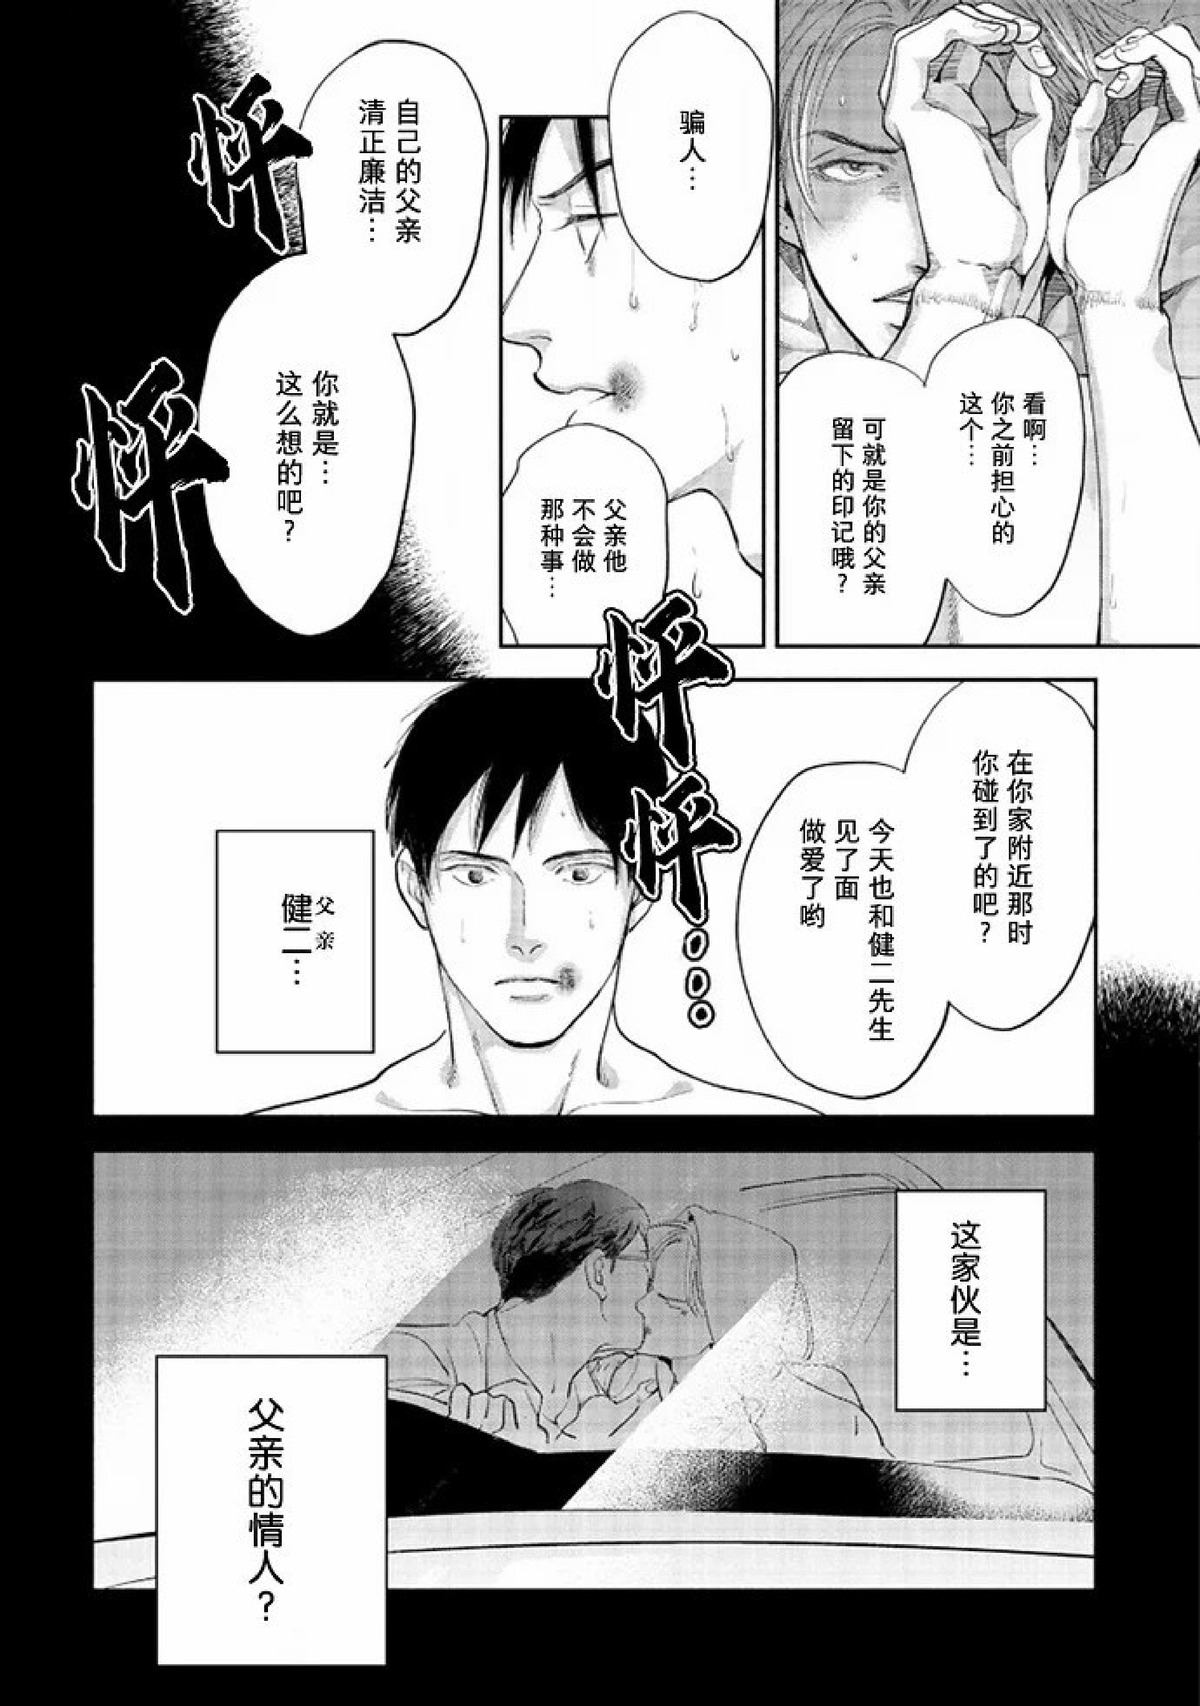 【Two sides of the same coin[耽美]】漫画-（上卷01-02）章节漫画下拉式图片-102.jpg